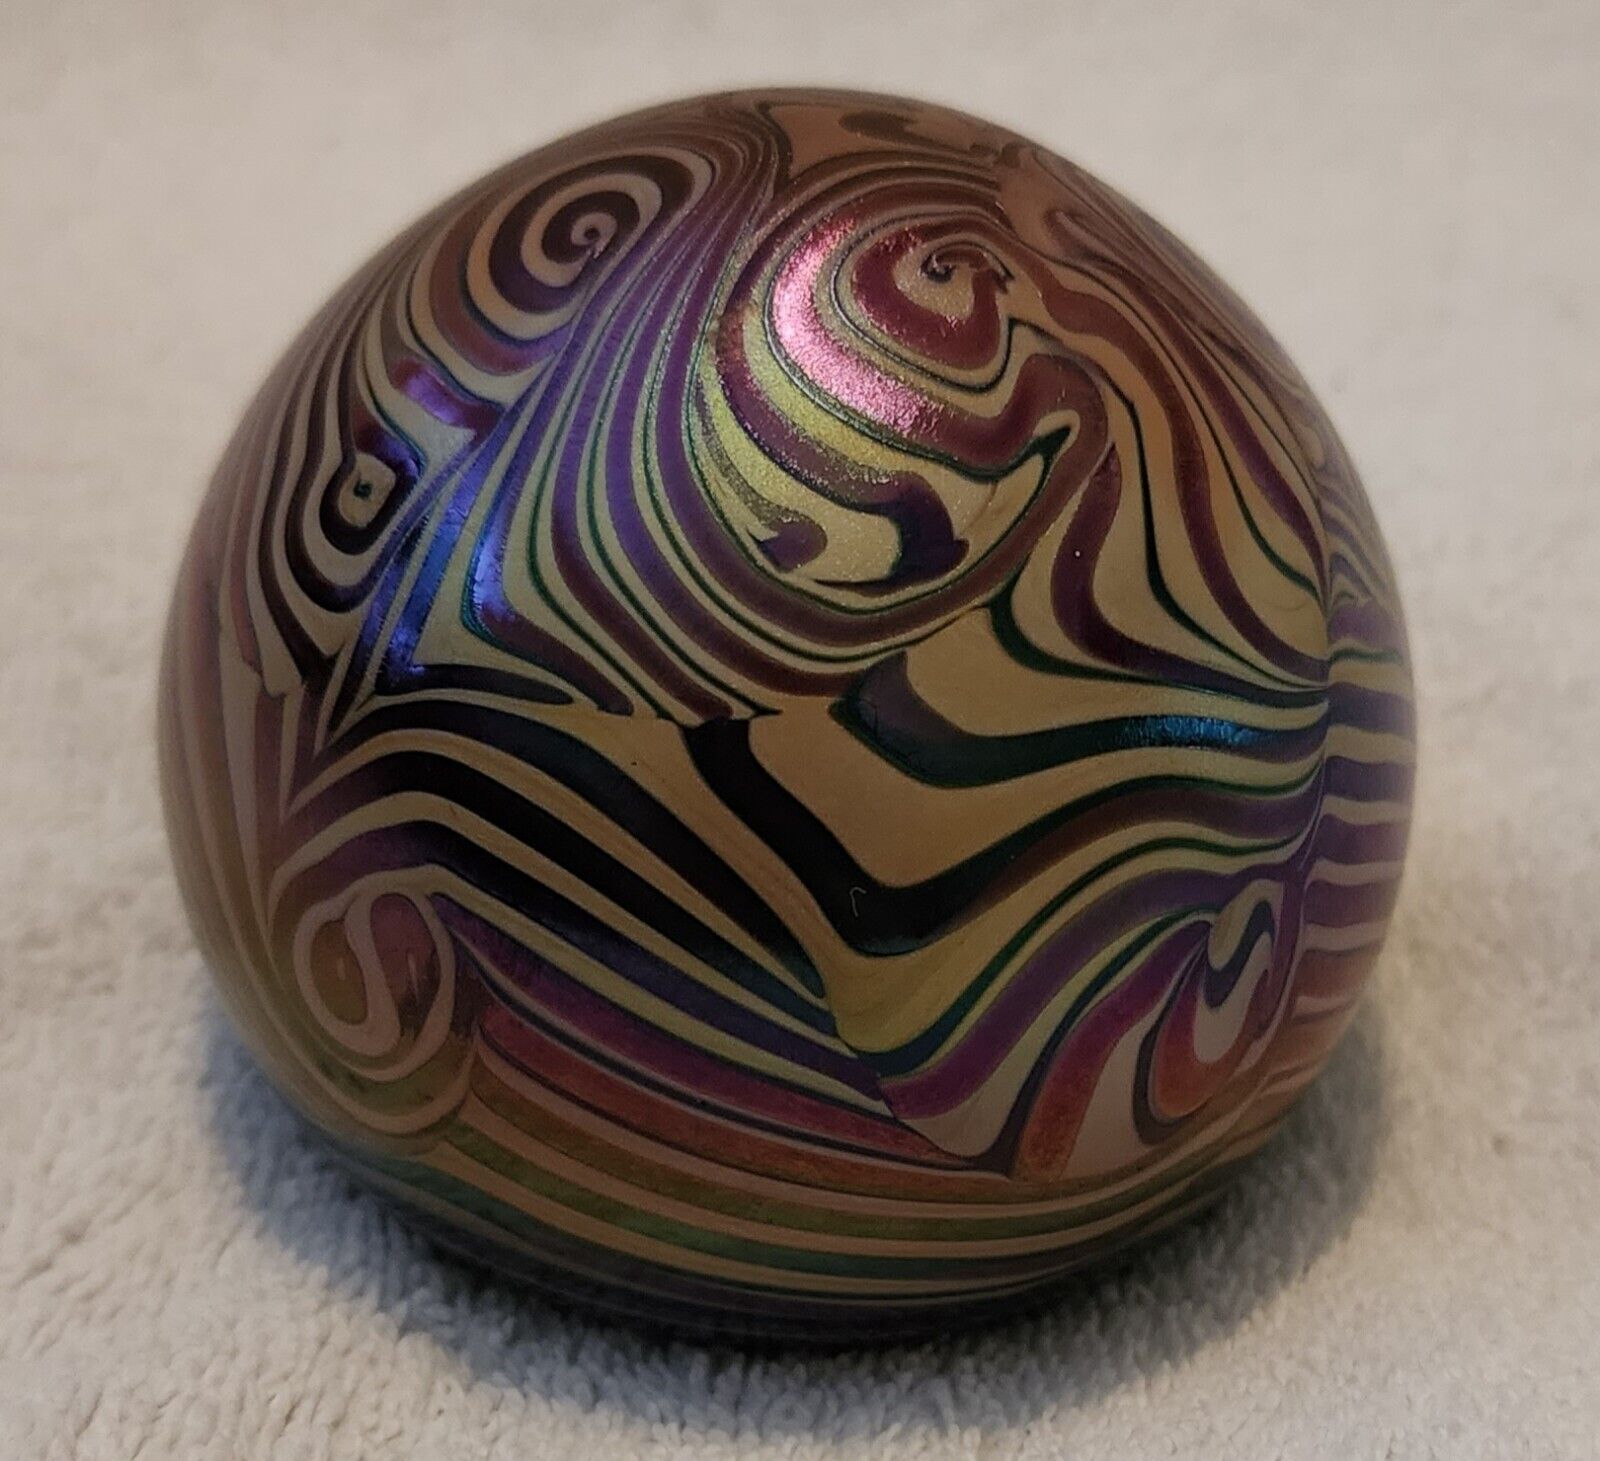 NOUROT DAVID LINDSAY MULTI-COLOR IRIDESCENT SWIRL ART GLASS PAPERWEIGHT - SIGNED